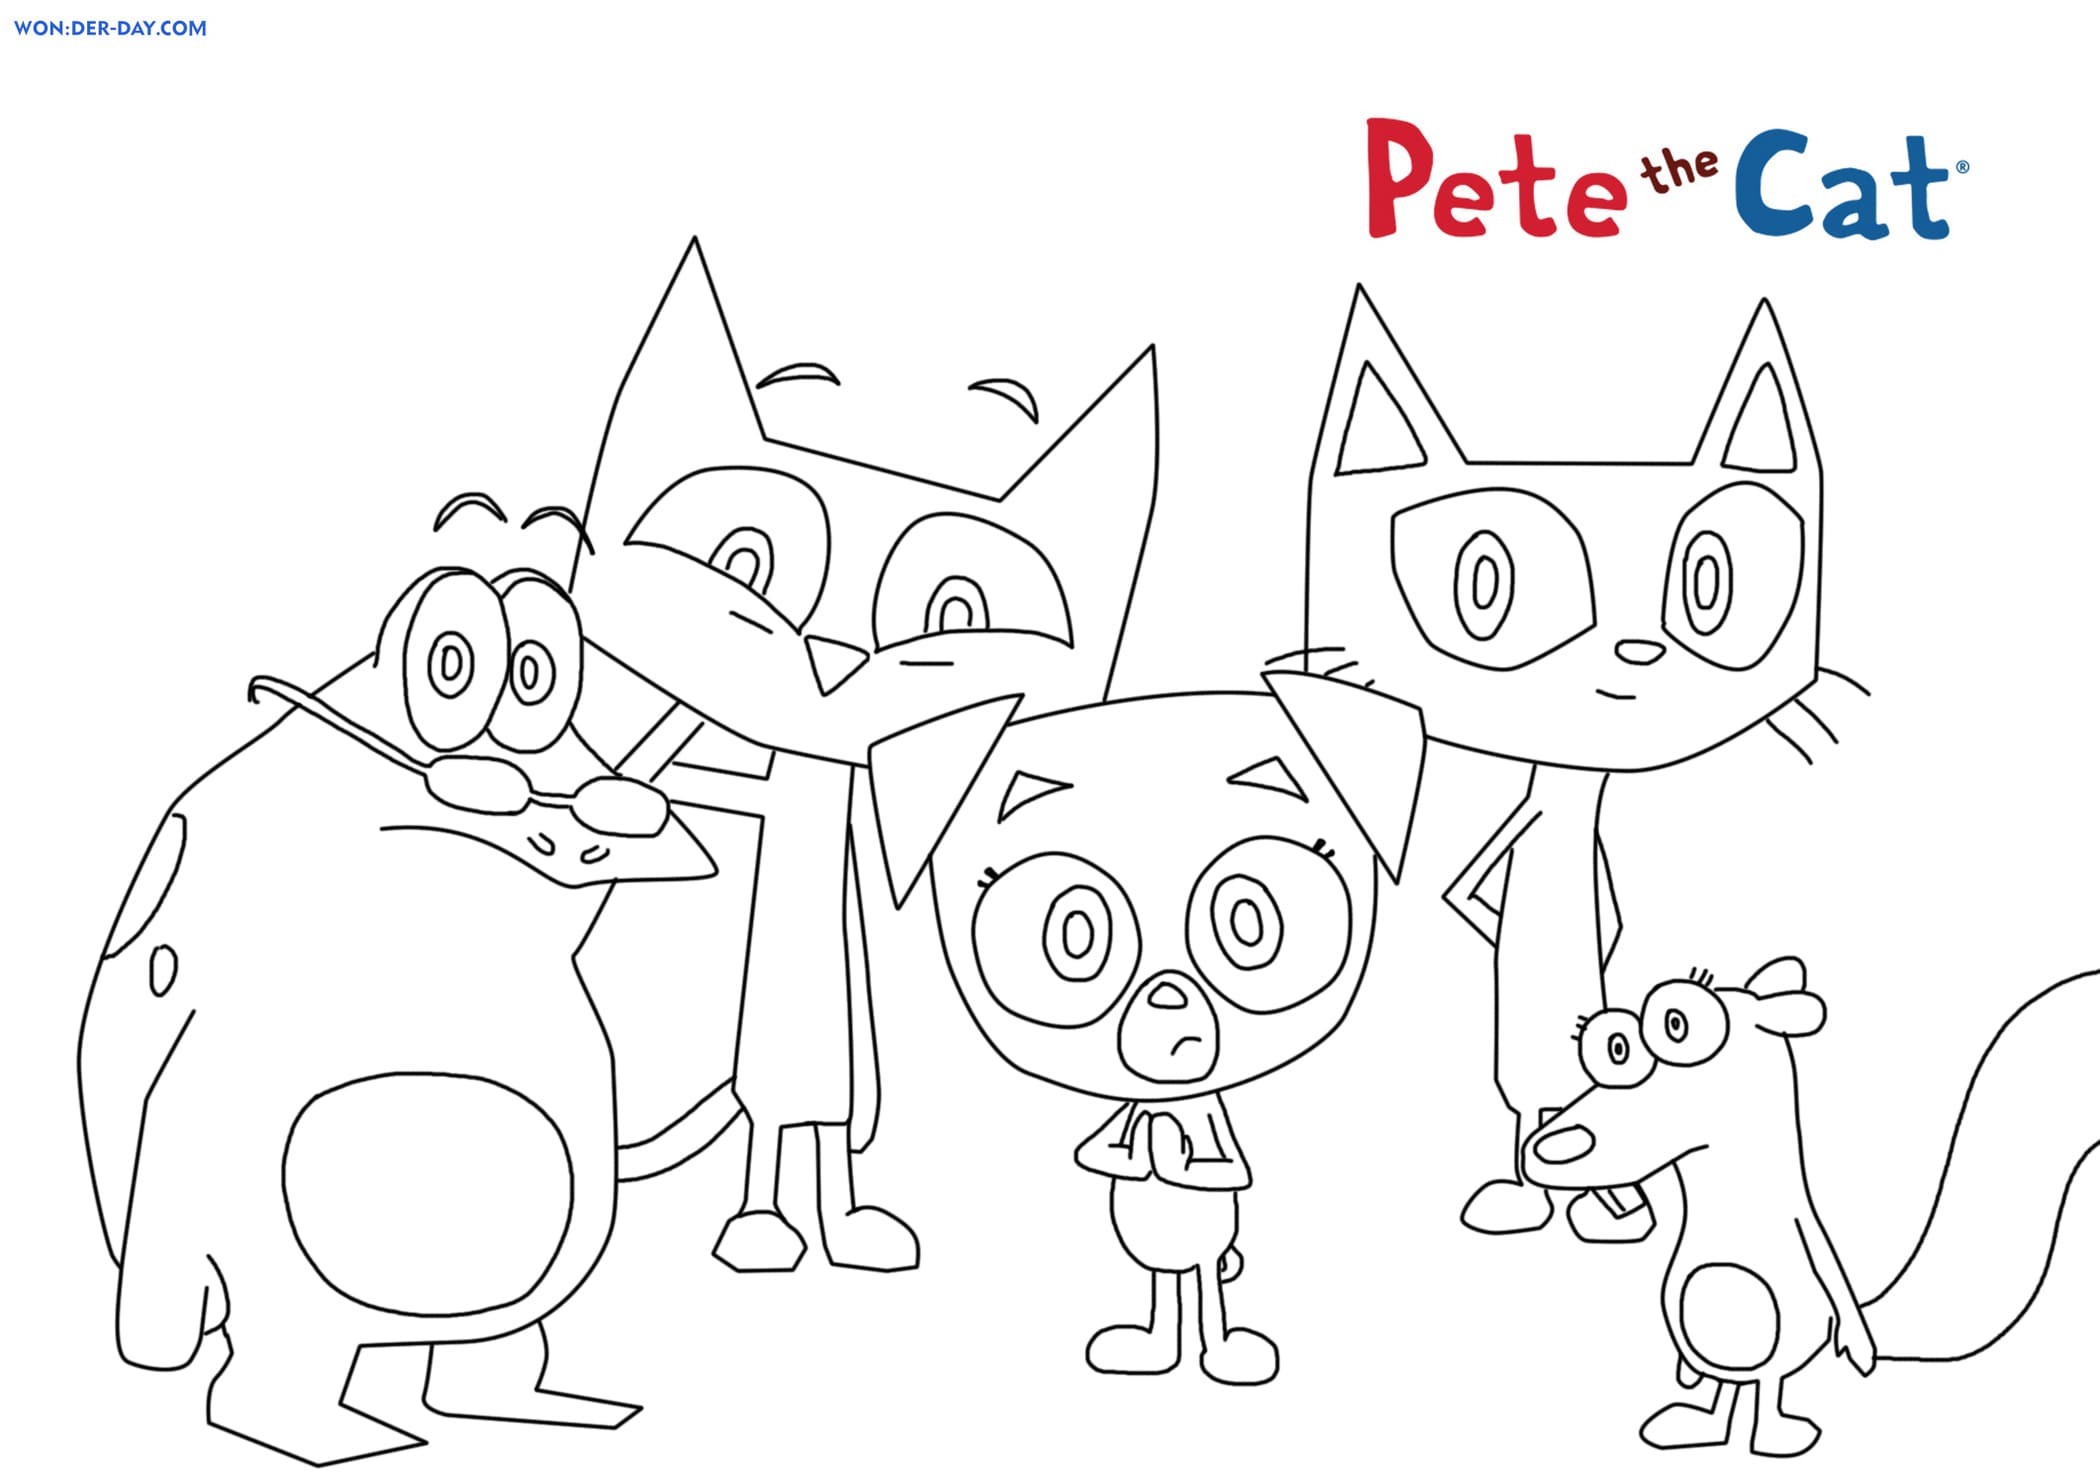 pete-the-cat-coloring-pages-free-coloring-pages-wonder-day